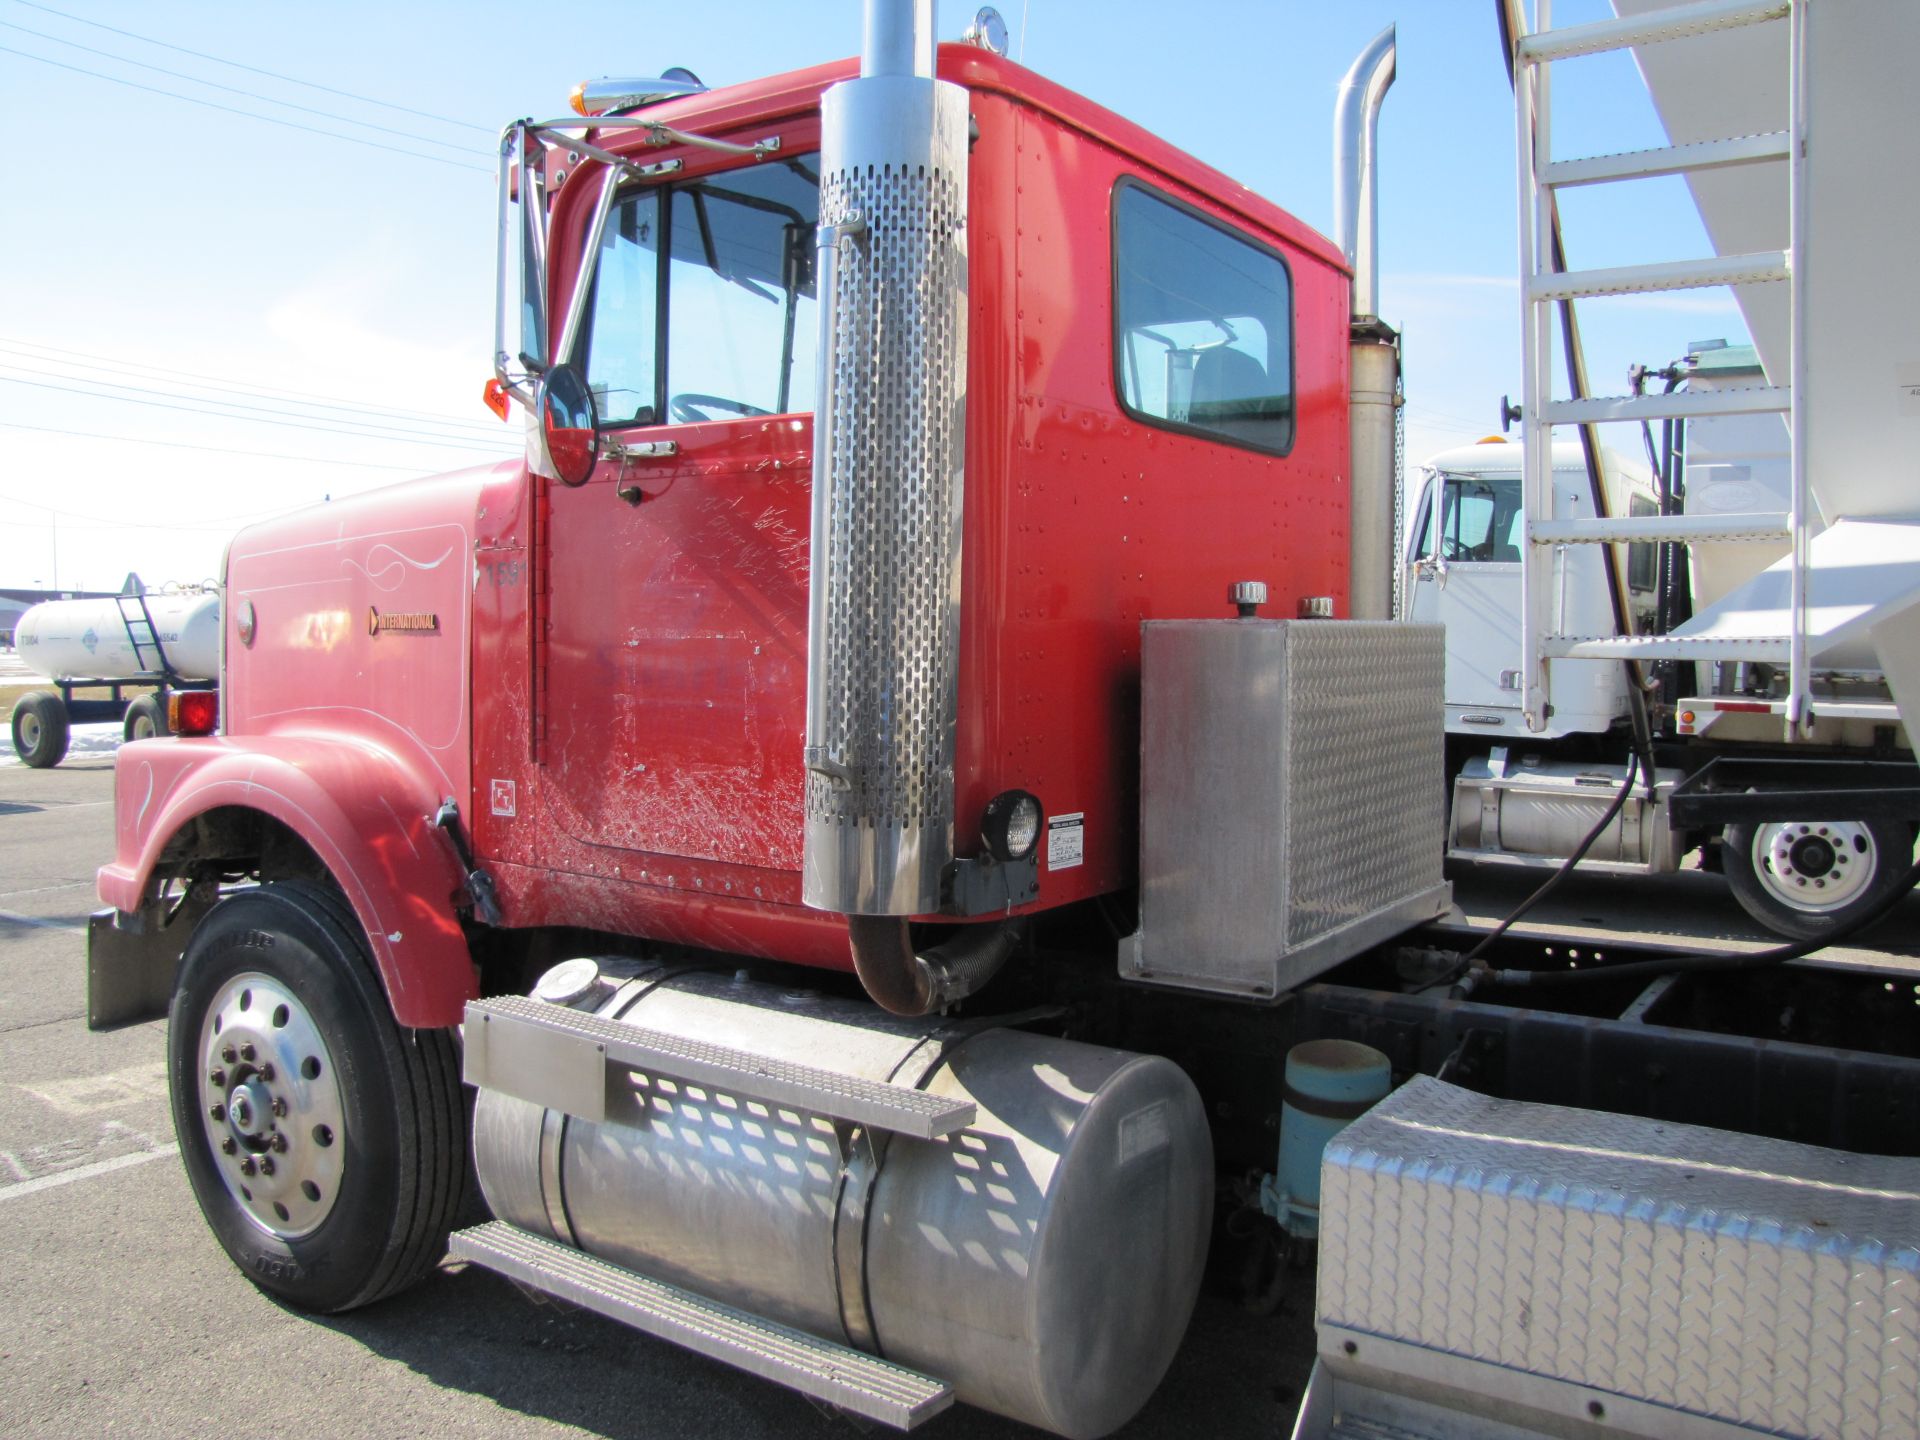 1988 International Eagle 9300, day cab, air ride, wet kit, Cat 3406P, Fuller 13-speed trans - Image 59 of 88